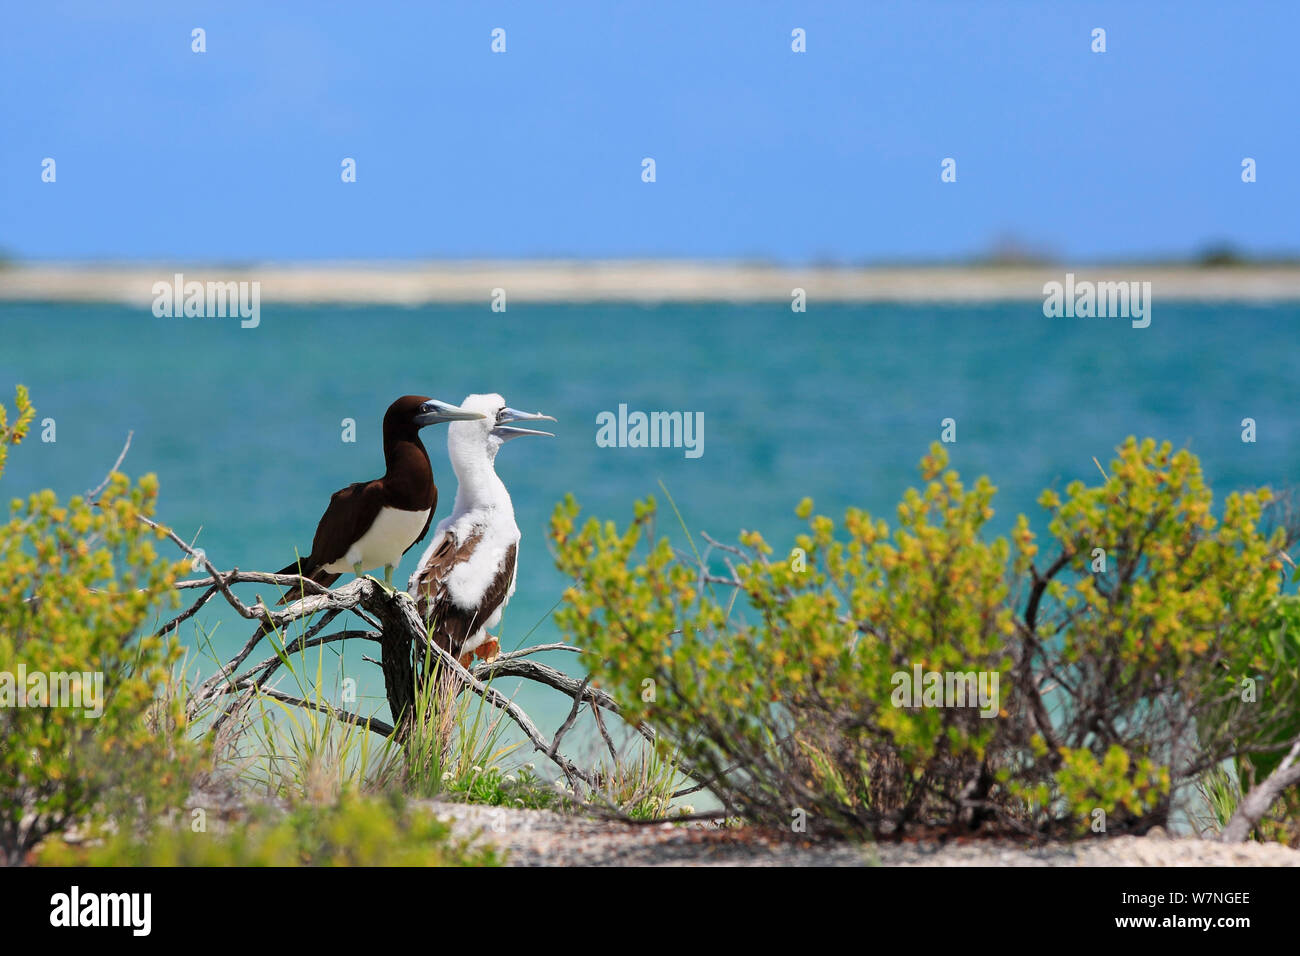 File:Brown Booby (Sula leucogaster) chick on Christmas Island 2.jpg -  Wikipedia